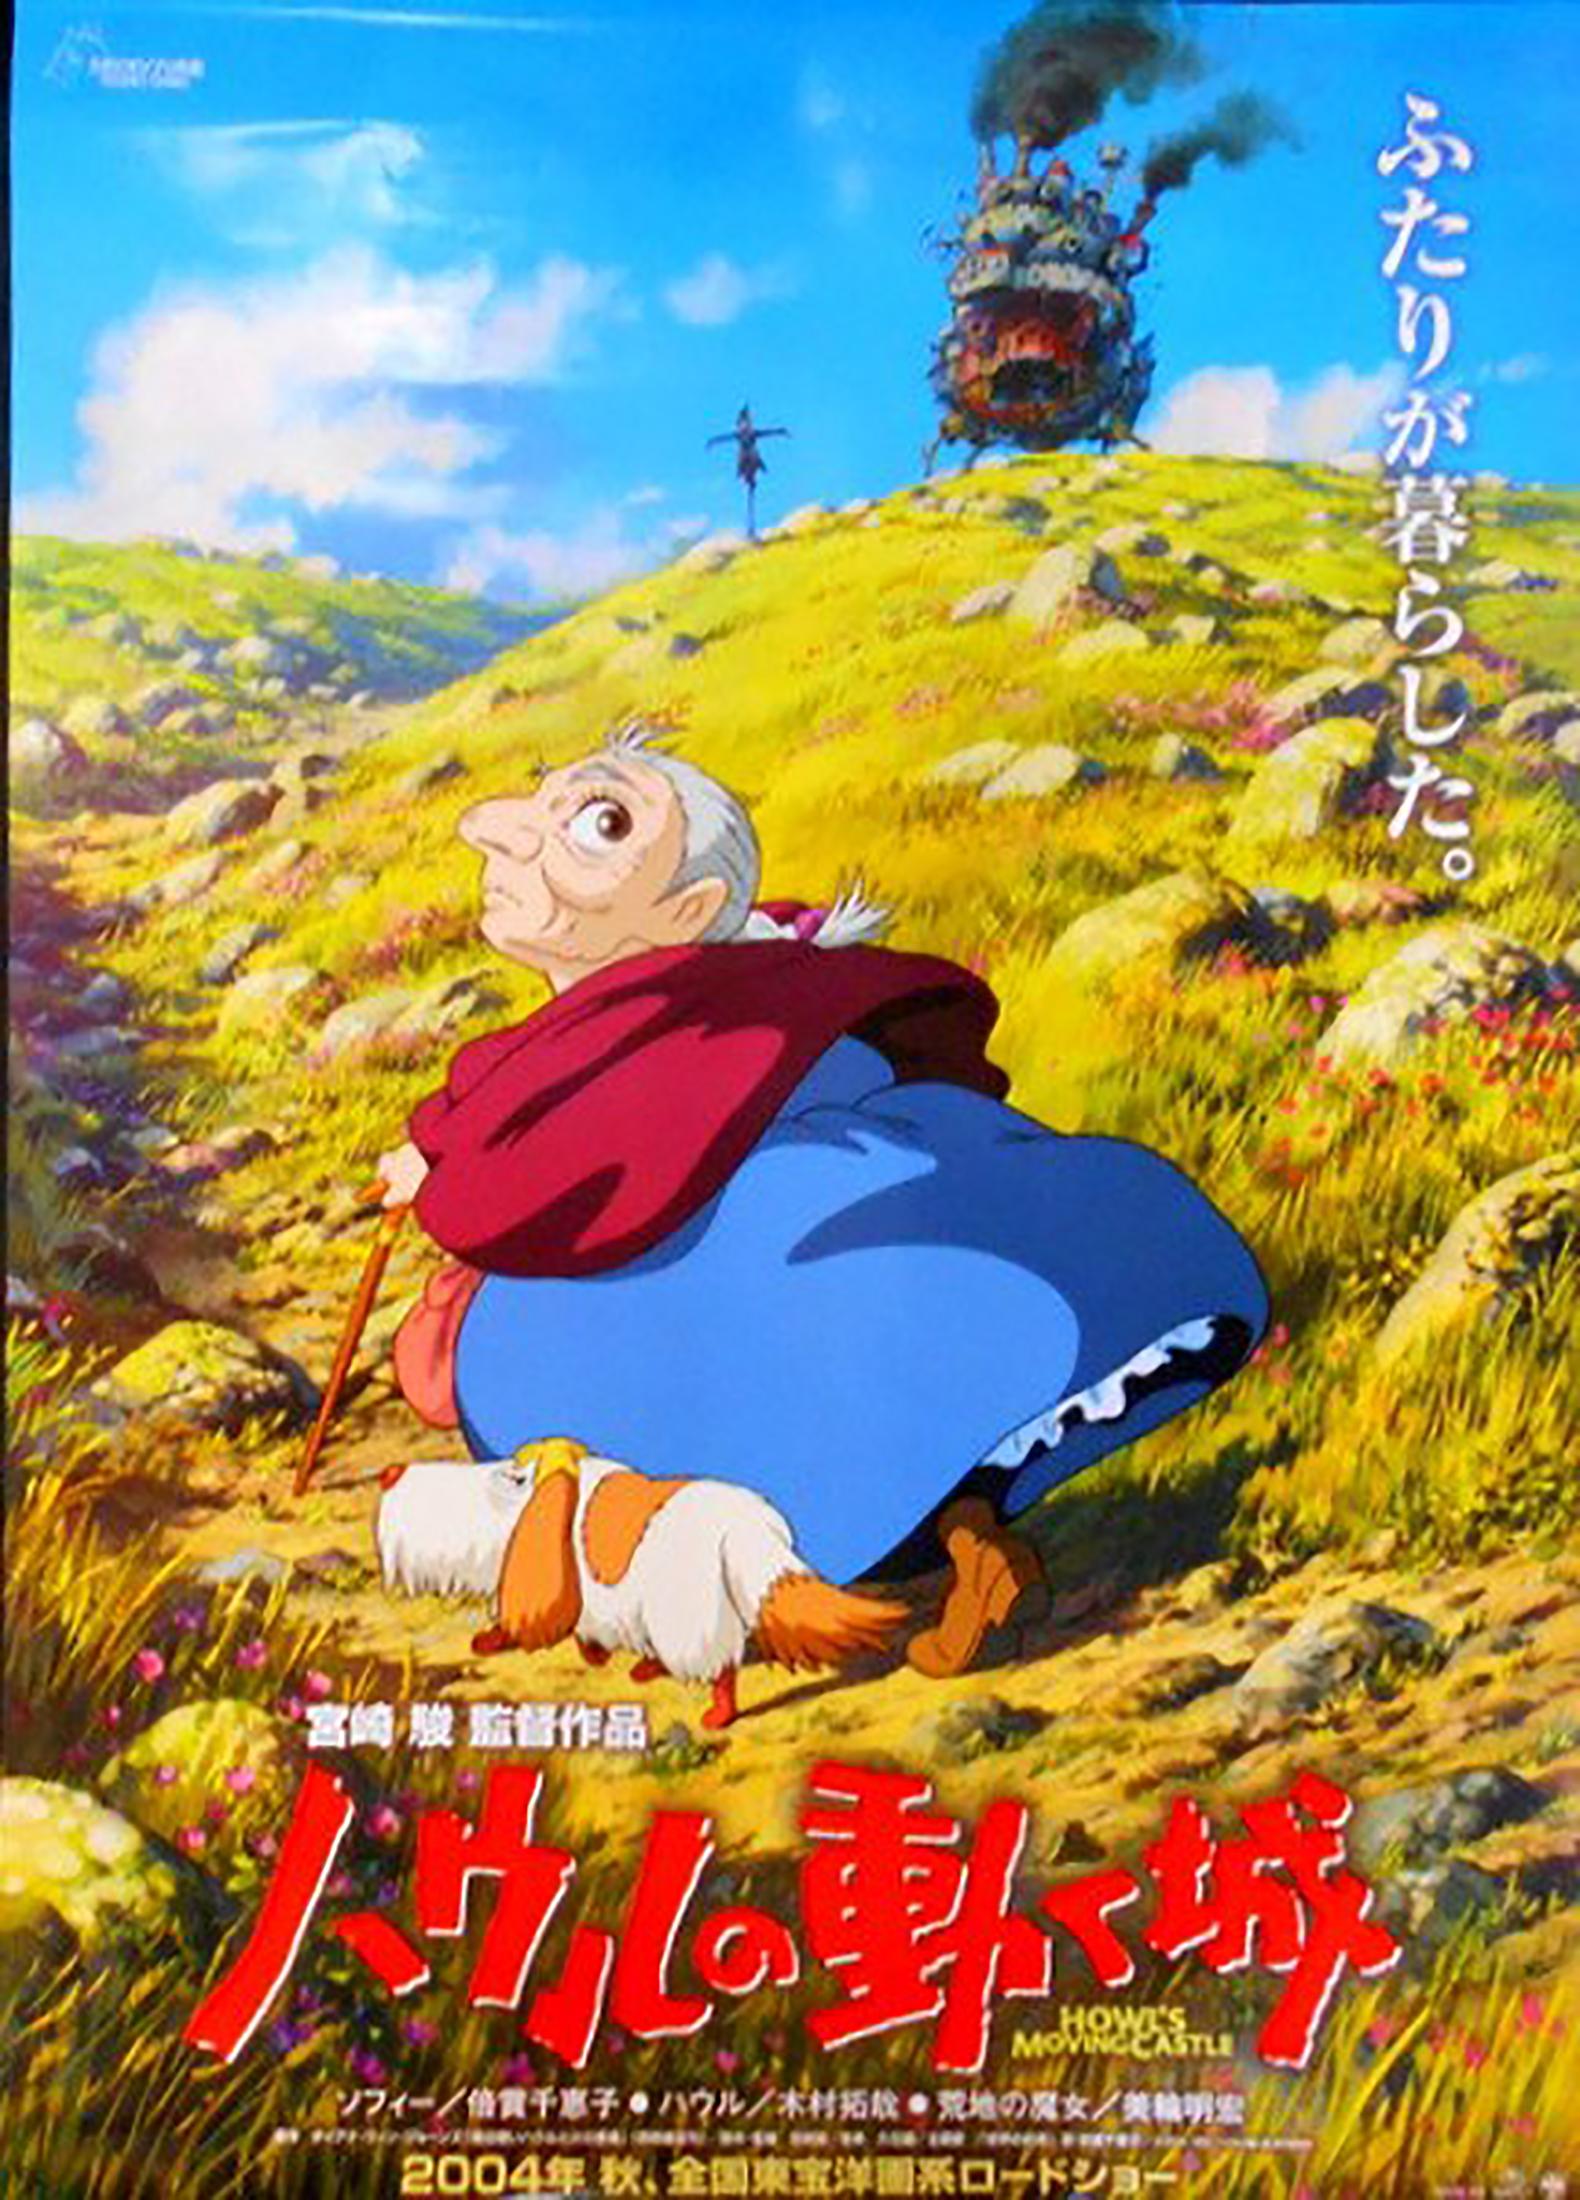 ghibli authentic poster